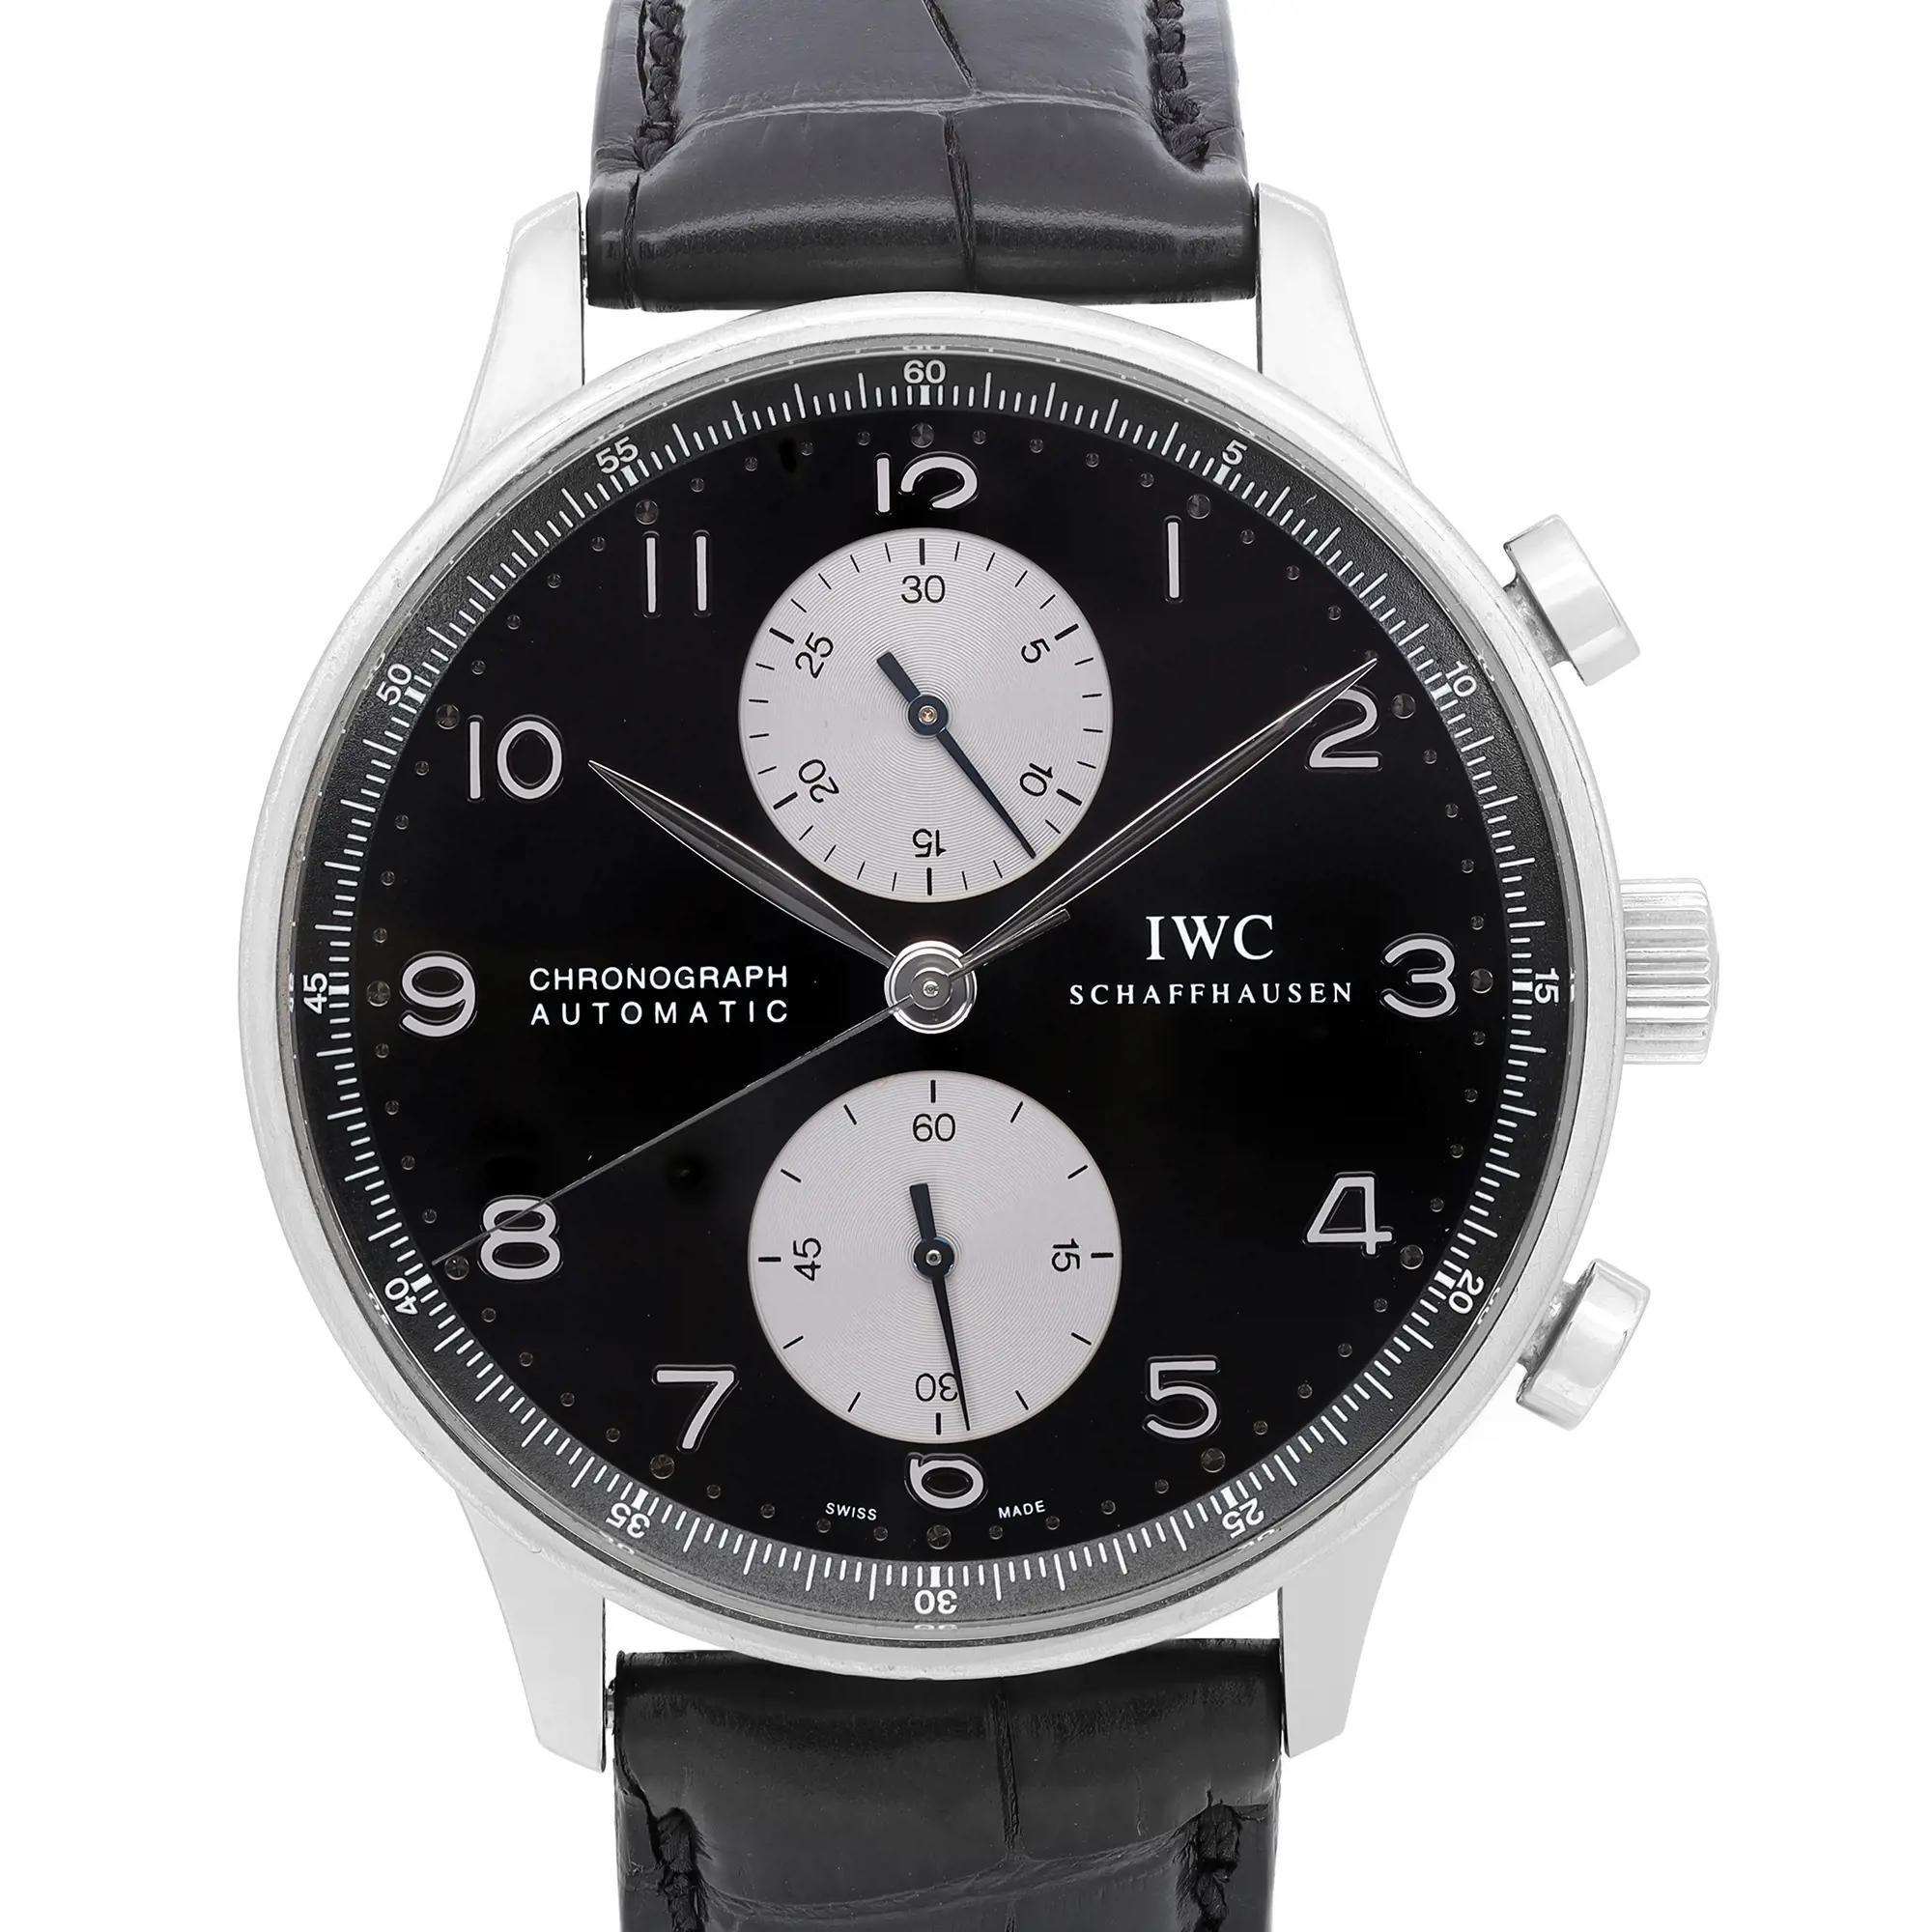 The watch is in excellent condition. The original box and paper are not included.

Brand: IWC  Type: Wristwatch  Department: Men  Model Number: IW371404  Country/Region of Manufacture: Switzerland  Style: Luxury  Model: IWC Schaffhausen Portuguese 